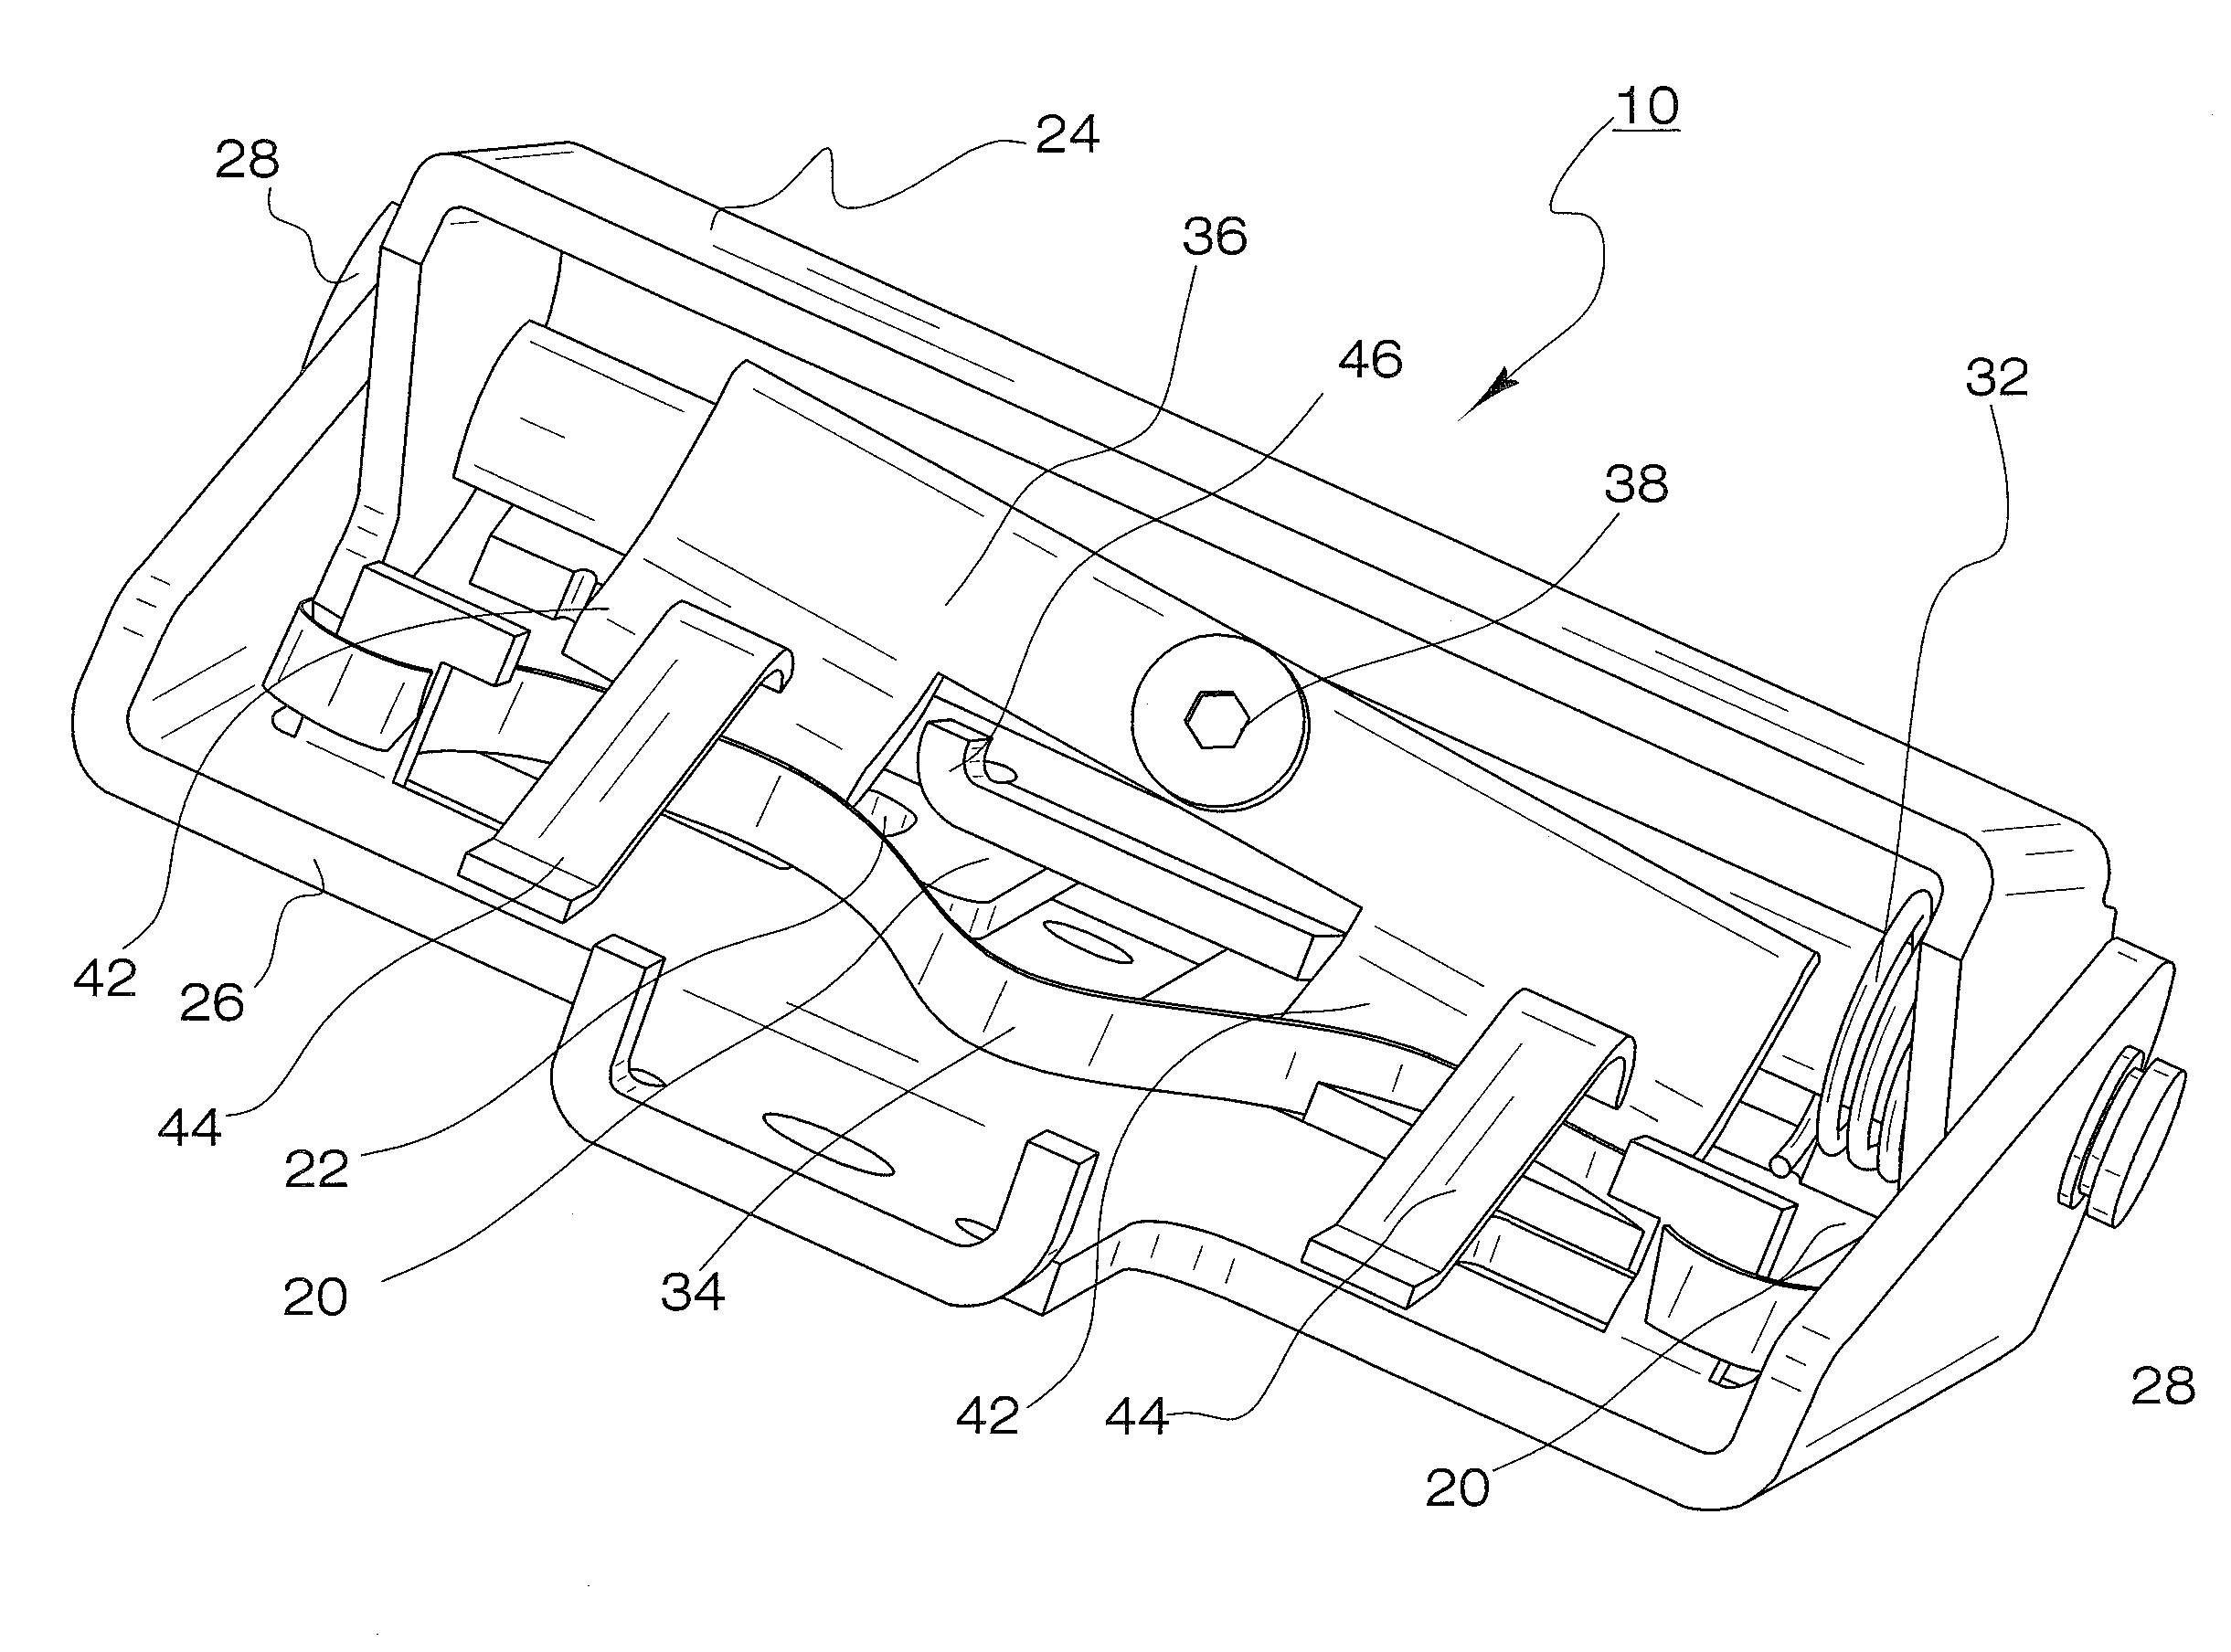 Twin buckle assembly with dual release positions